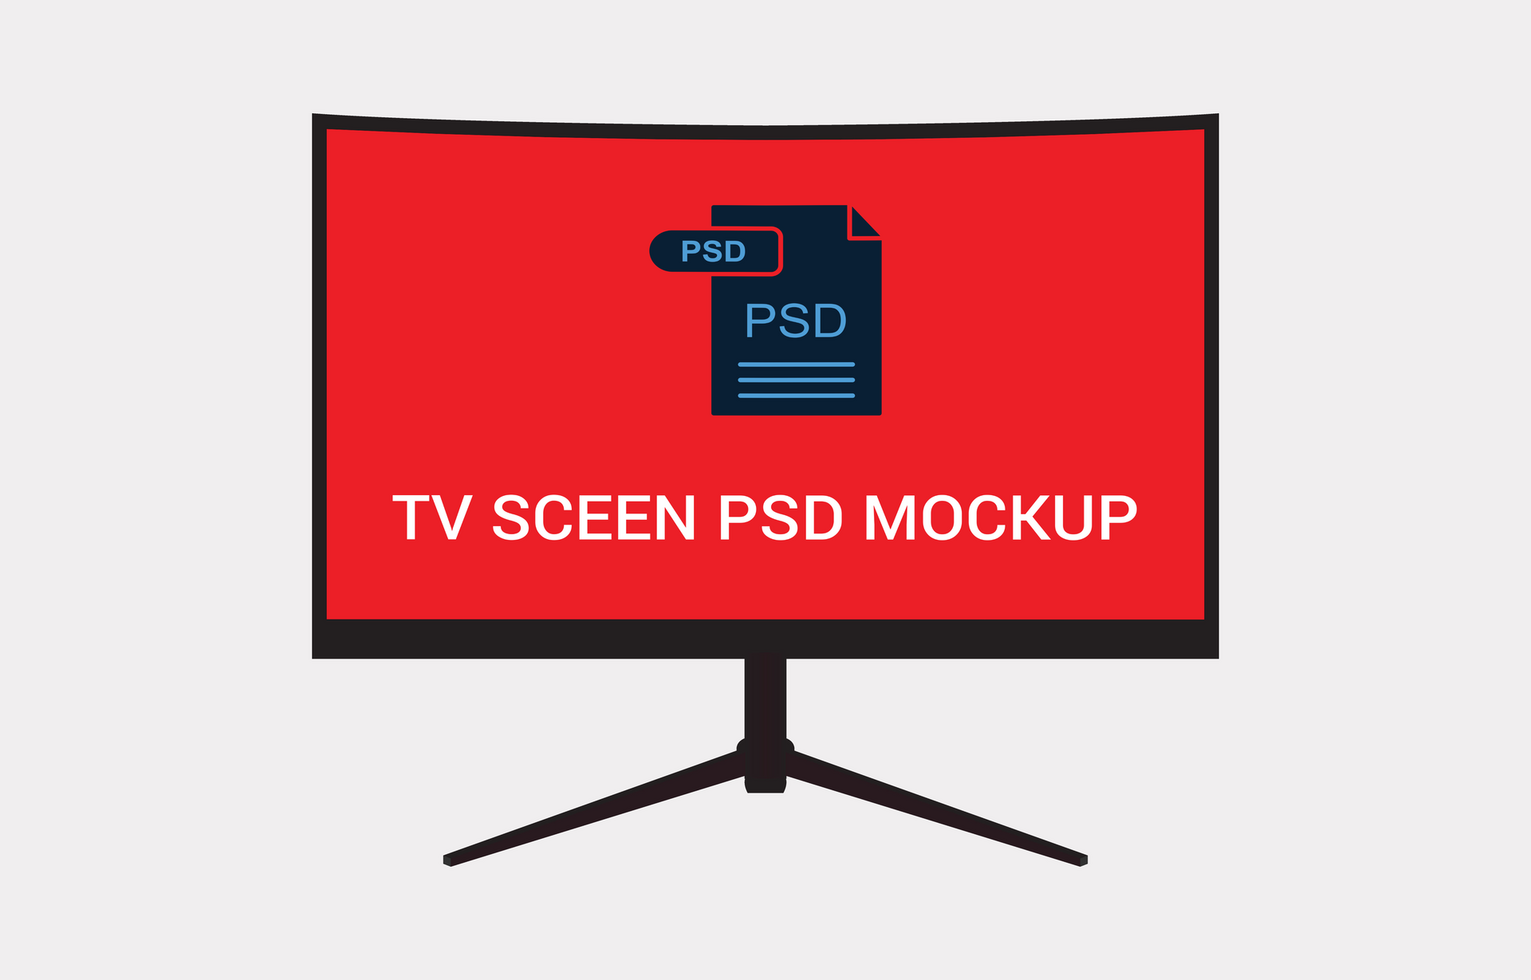 Monitor Sceen PSD MOckup File free download